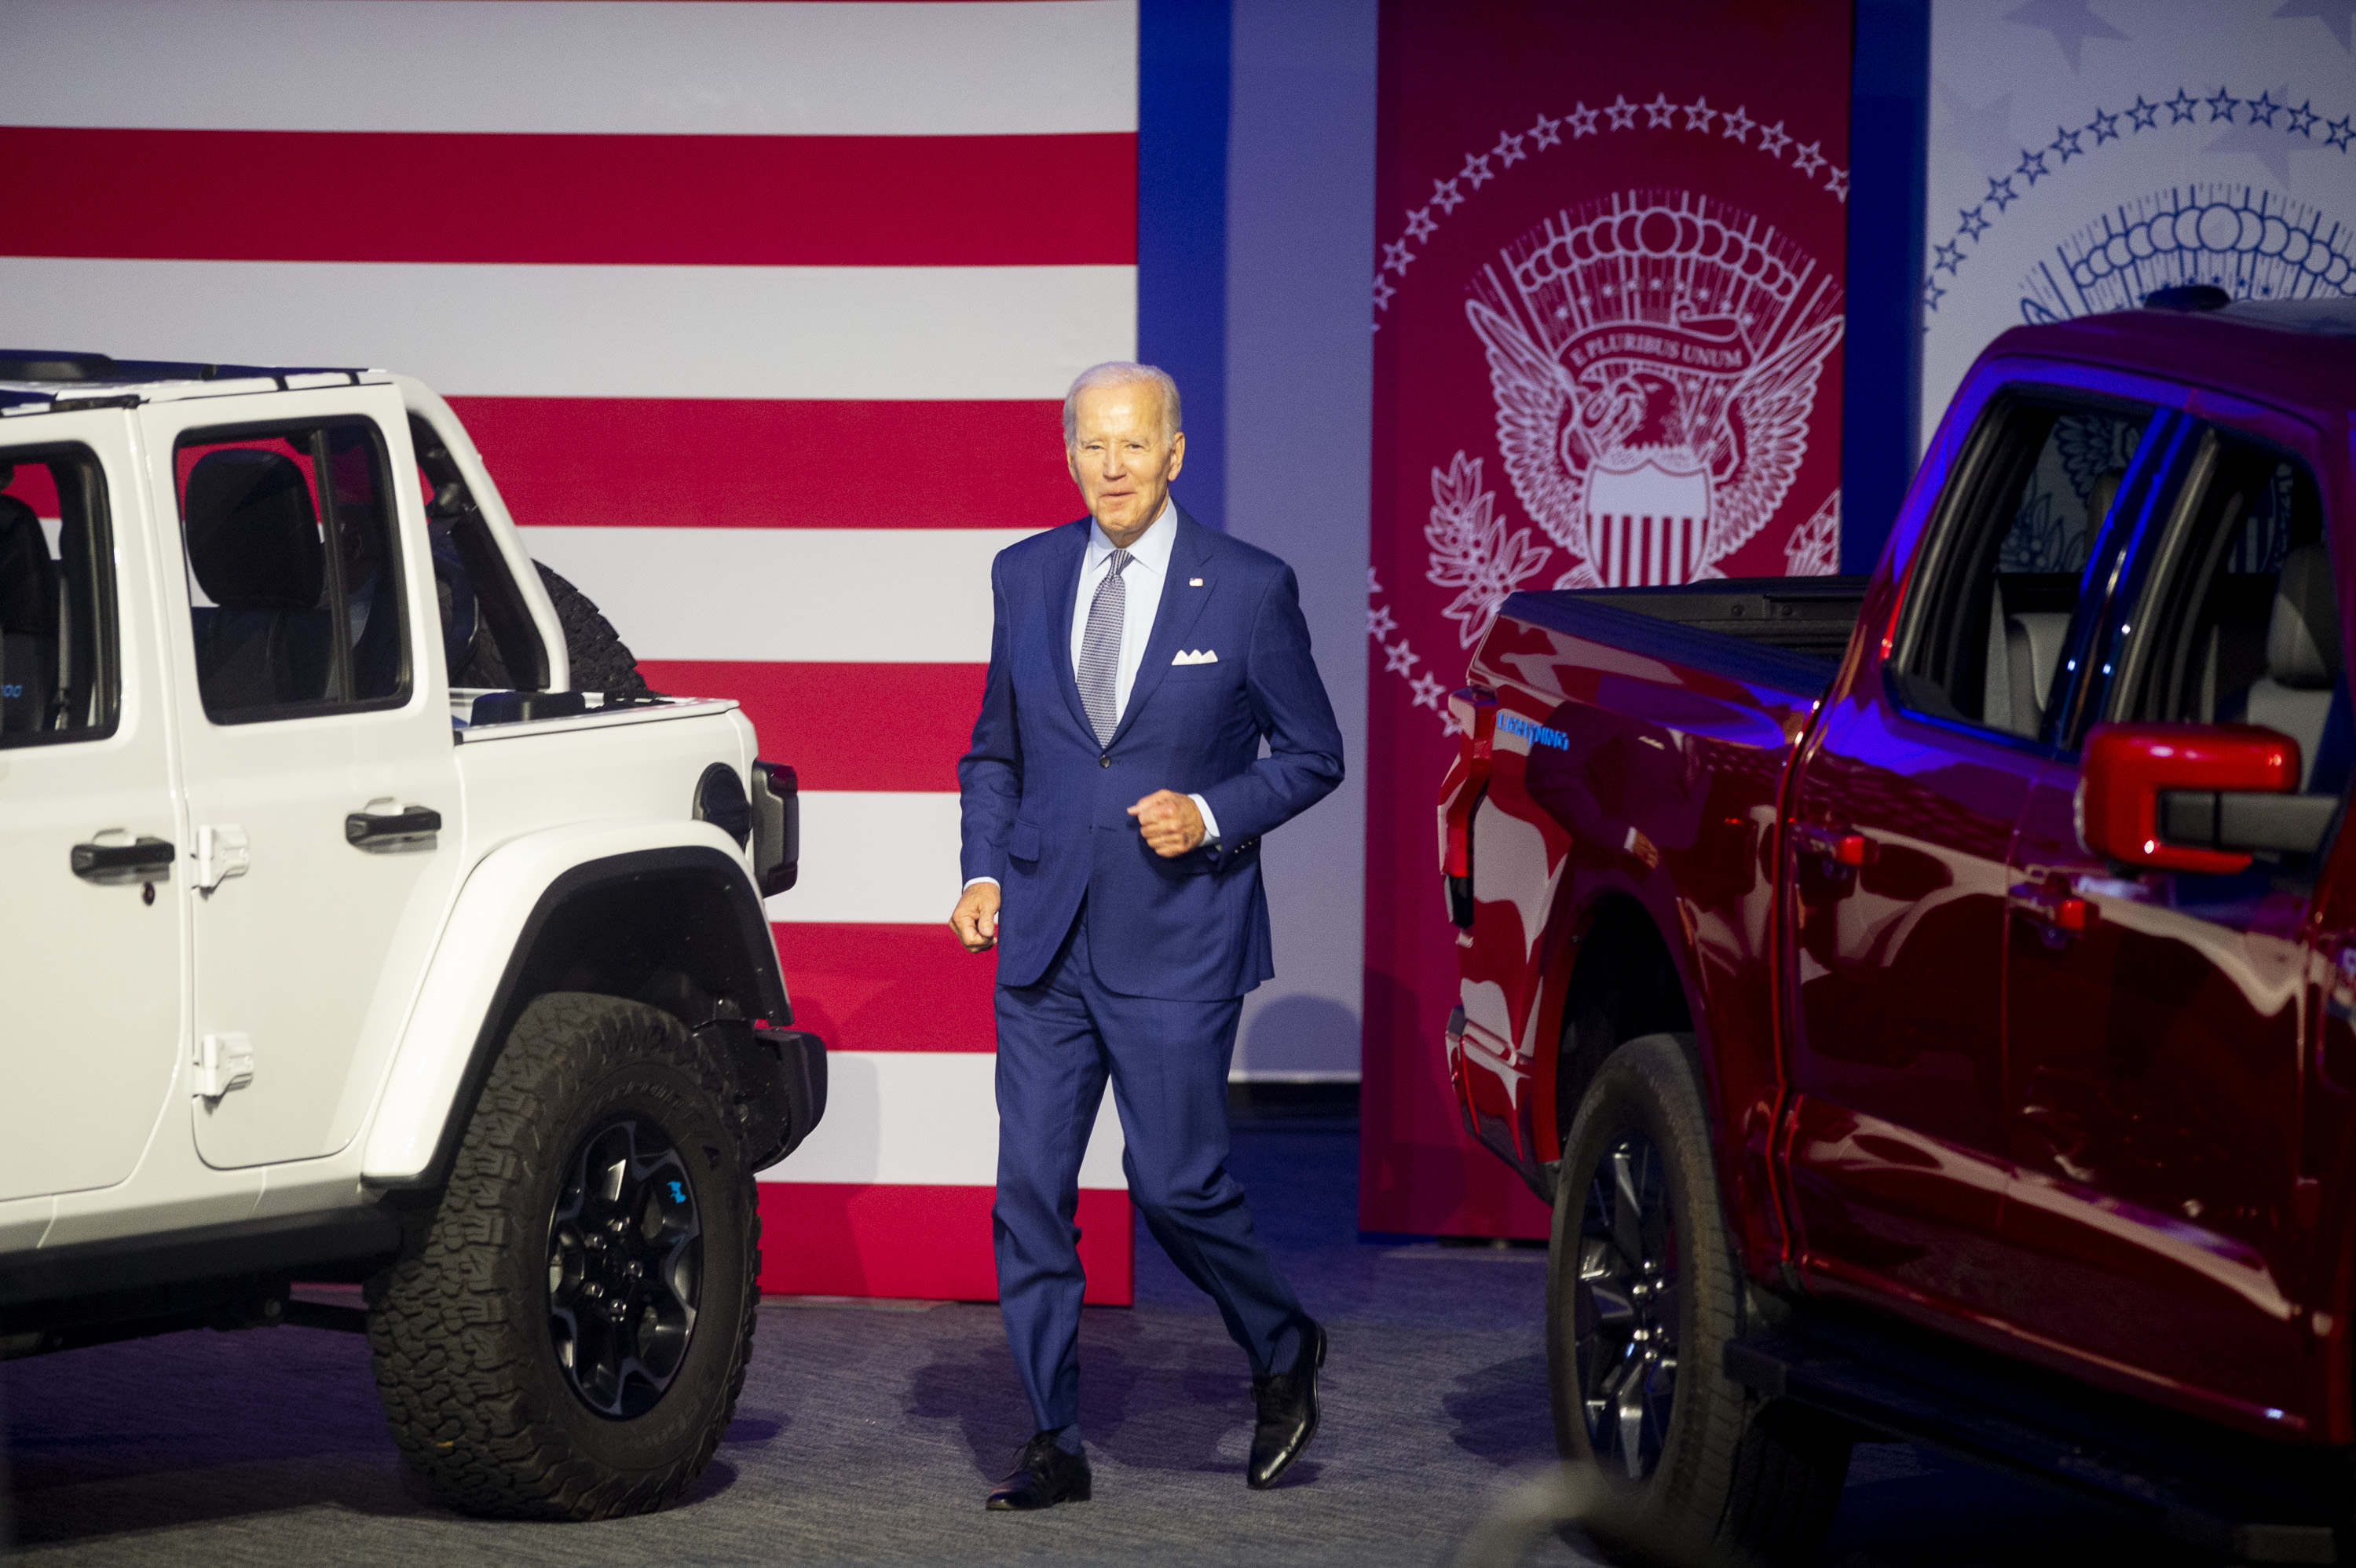 U.S. President Joe Biden jogs to the stage during the 2022 North American International Auto Show at Huntington Place in Detroit on Wednesday, Sept. 14 2022.